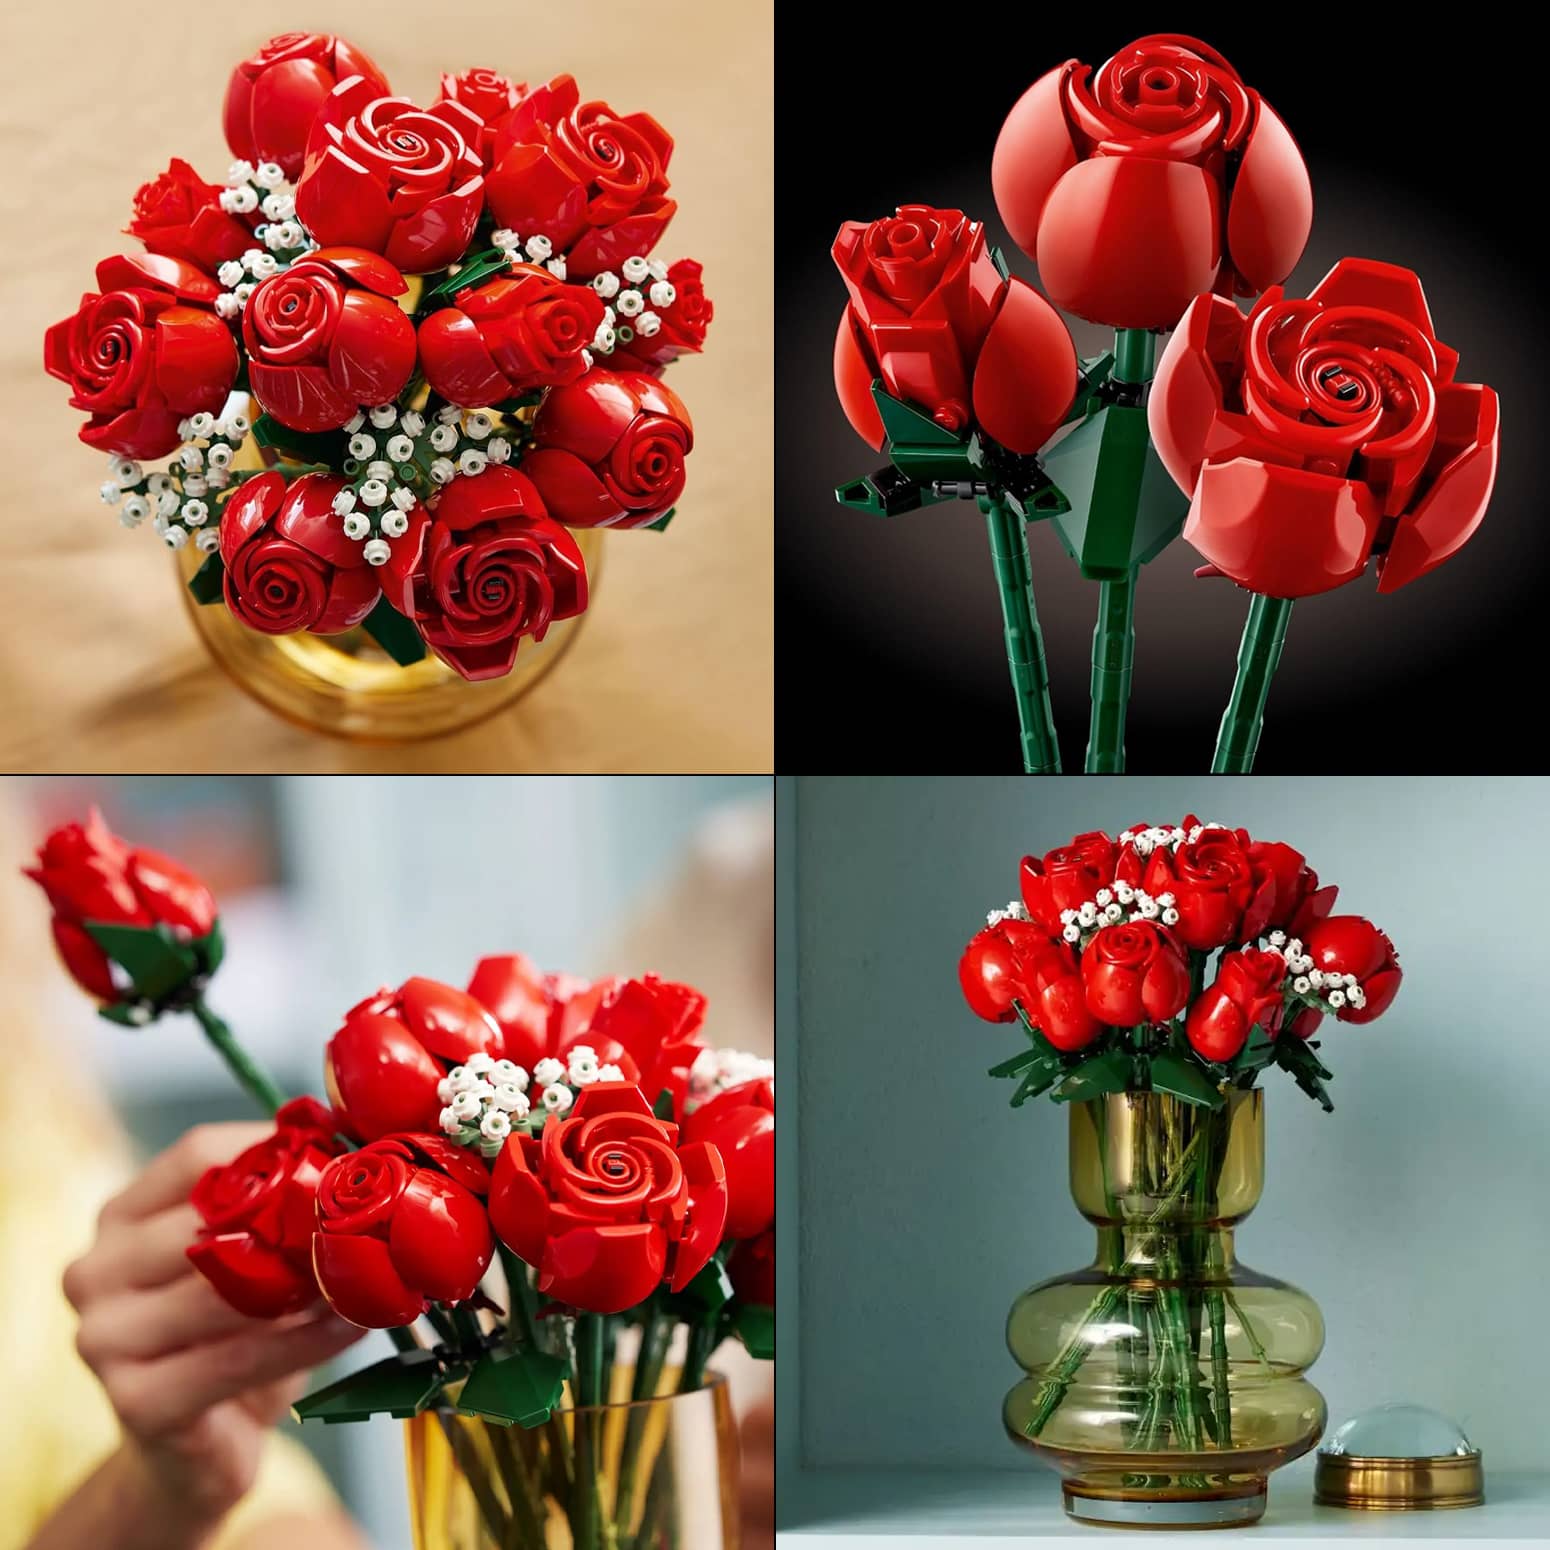 LEGO Bouquet of Long Stemmed Red Roses - 822 Pieces